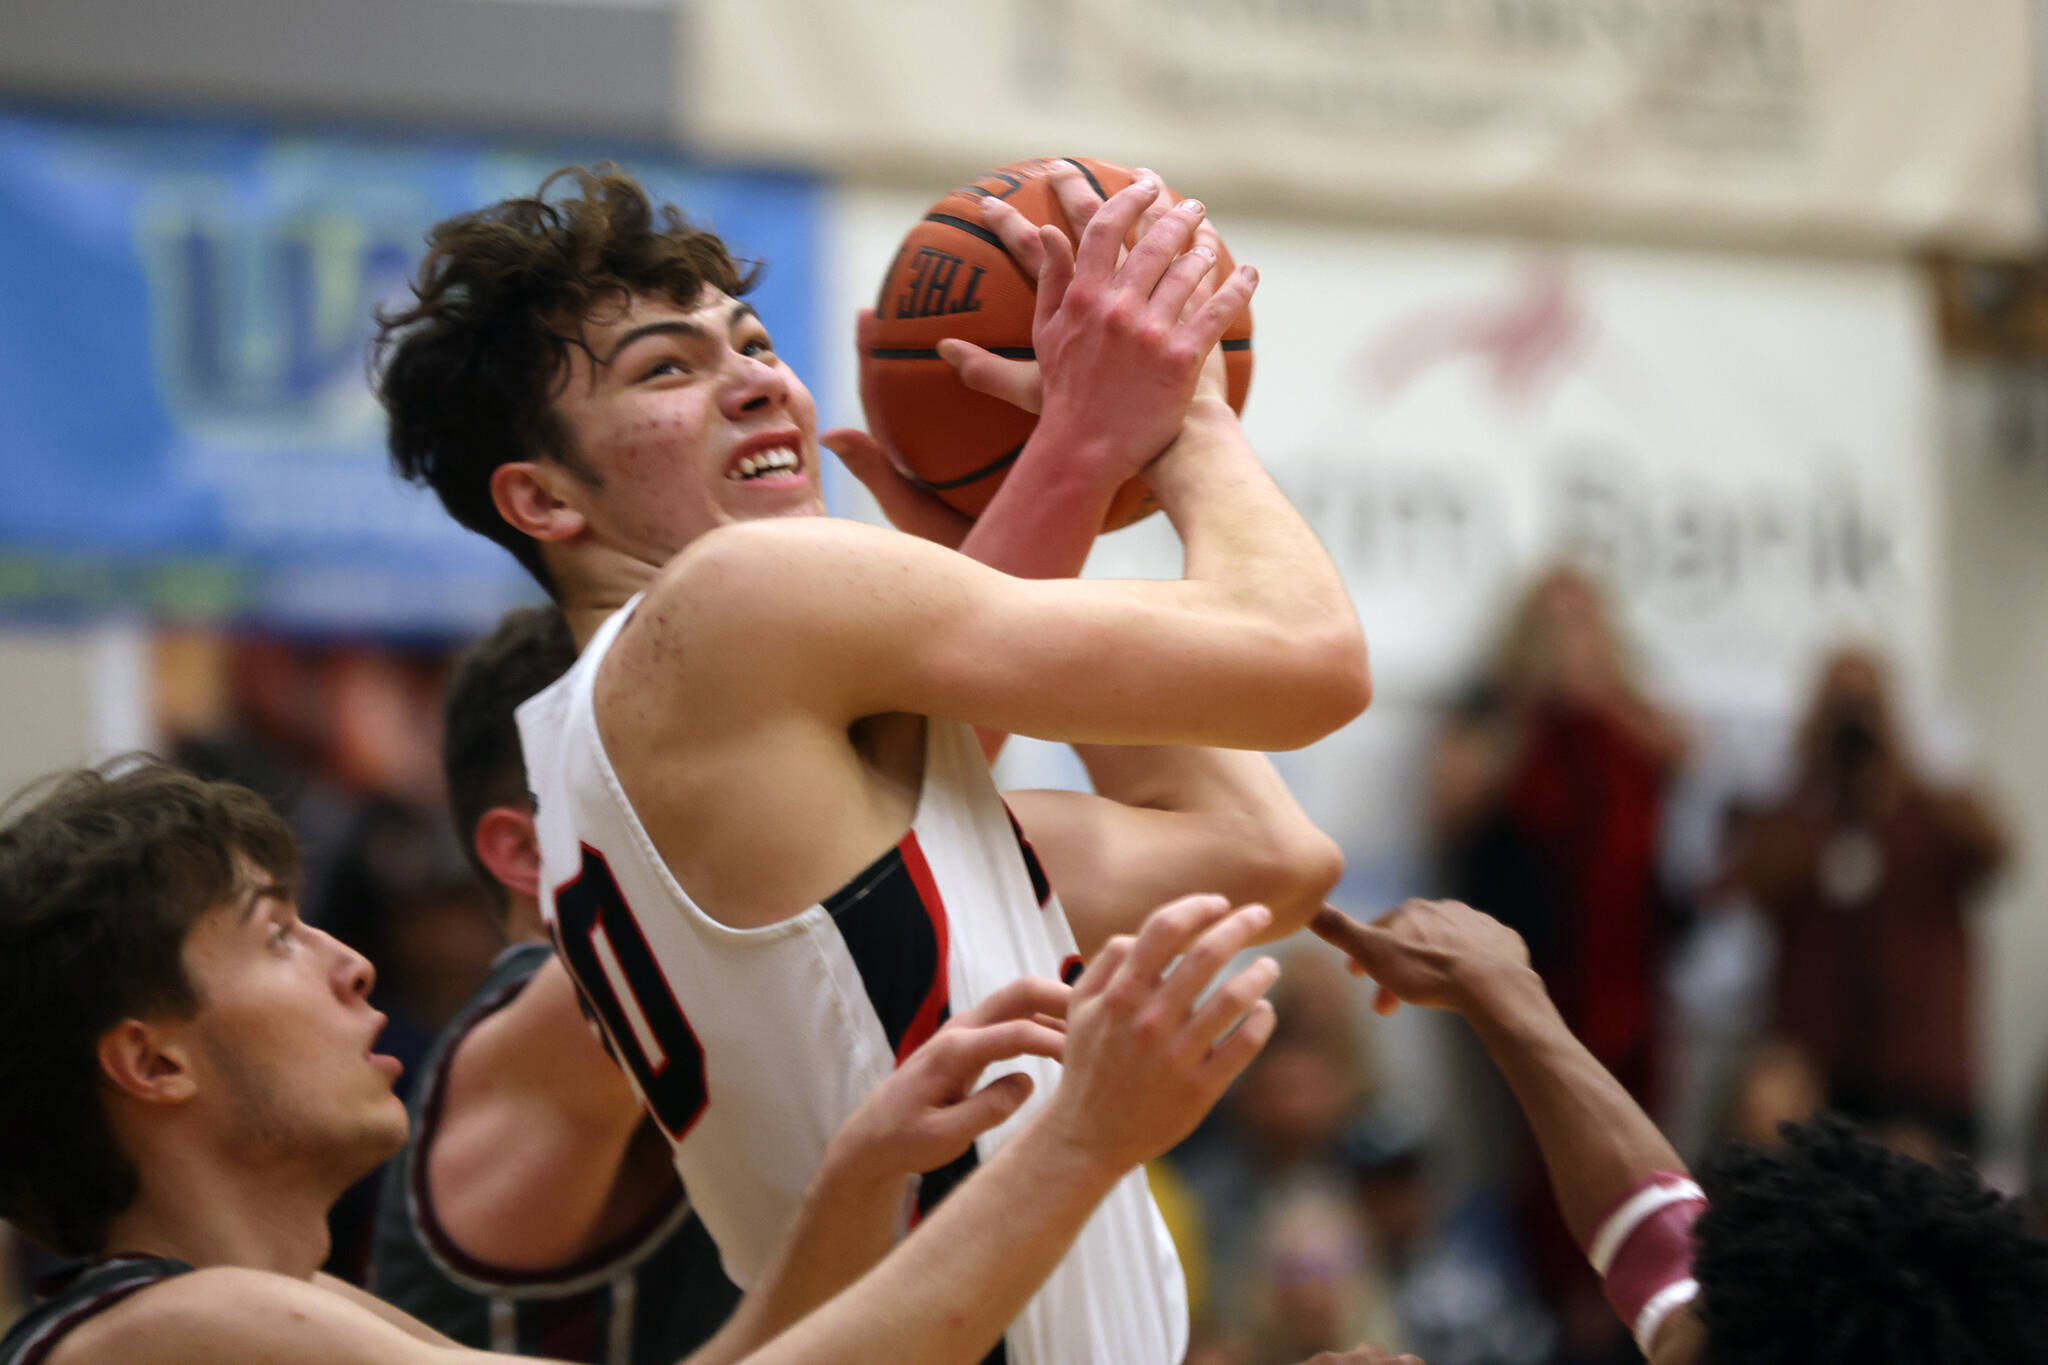 JDHS senior Orion Dybdahl rips down a board in a close contest against Ketchikan. The game took 36 minutes of gametime to resovle and ended 72-64 in Kayhi’s favor. The Crimson Bears and Kings will play for the Region V 4A title at 8:15 p.m. Saturday at Thunder Mountain High School. (Ben Hohenstatt / Juneau Empire)